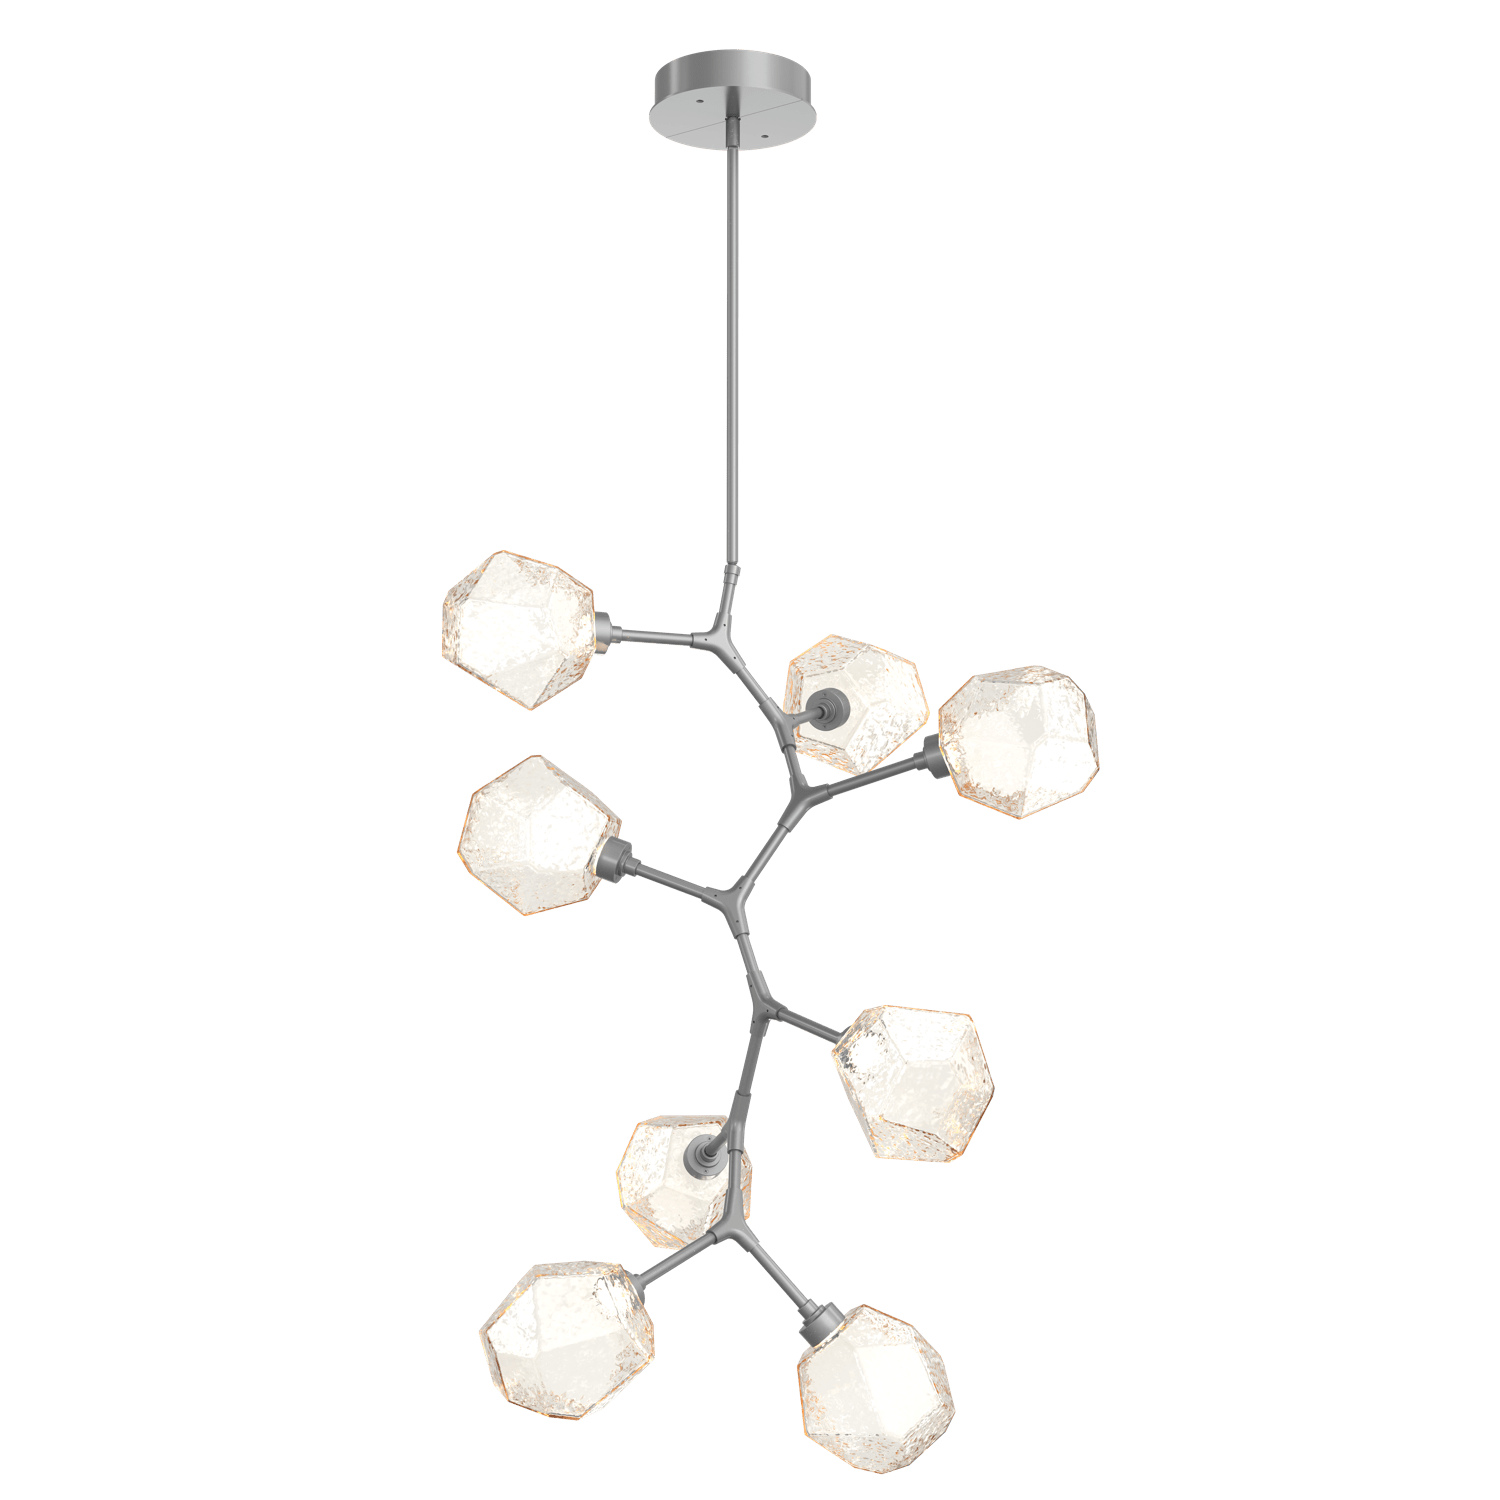 CHB0039-VB-CS-A-Hammerton-Studio-Gem-8-light-modern-vine-chandelier-with-classic-silver-finish-and-amber-blown-glass-shades-and-LED-lamping